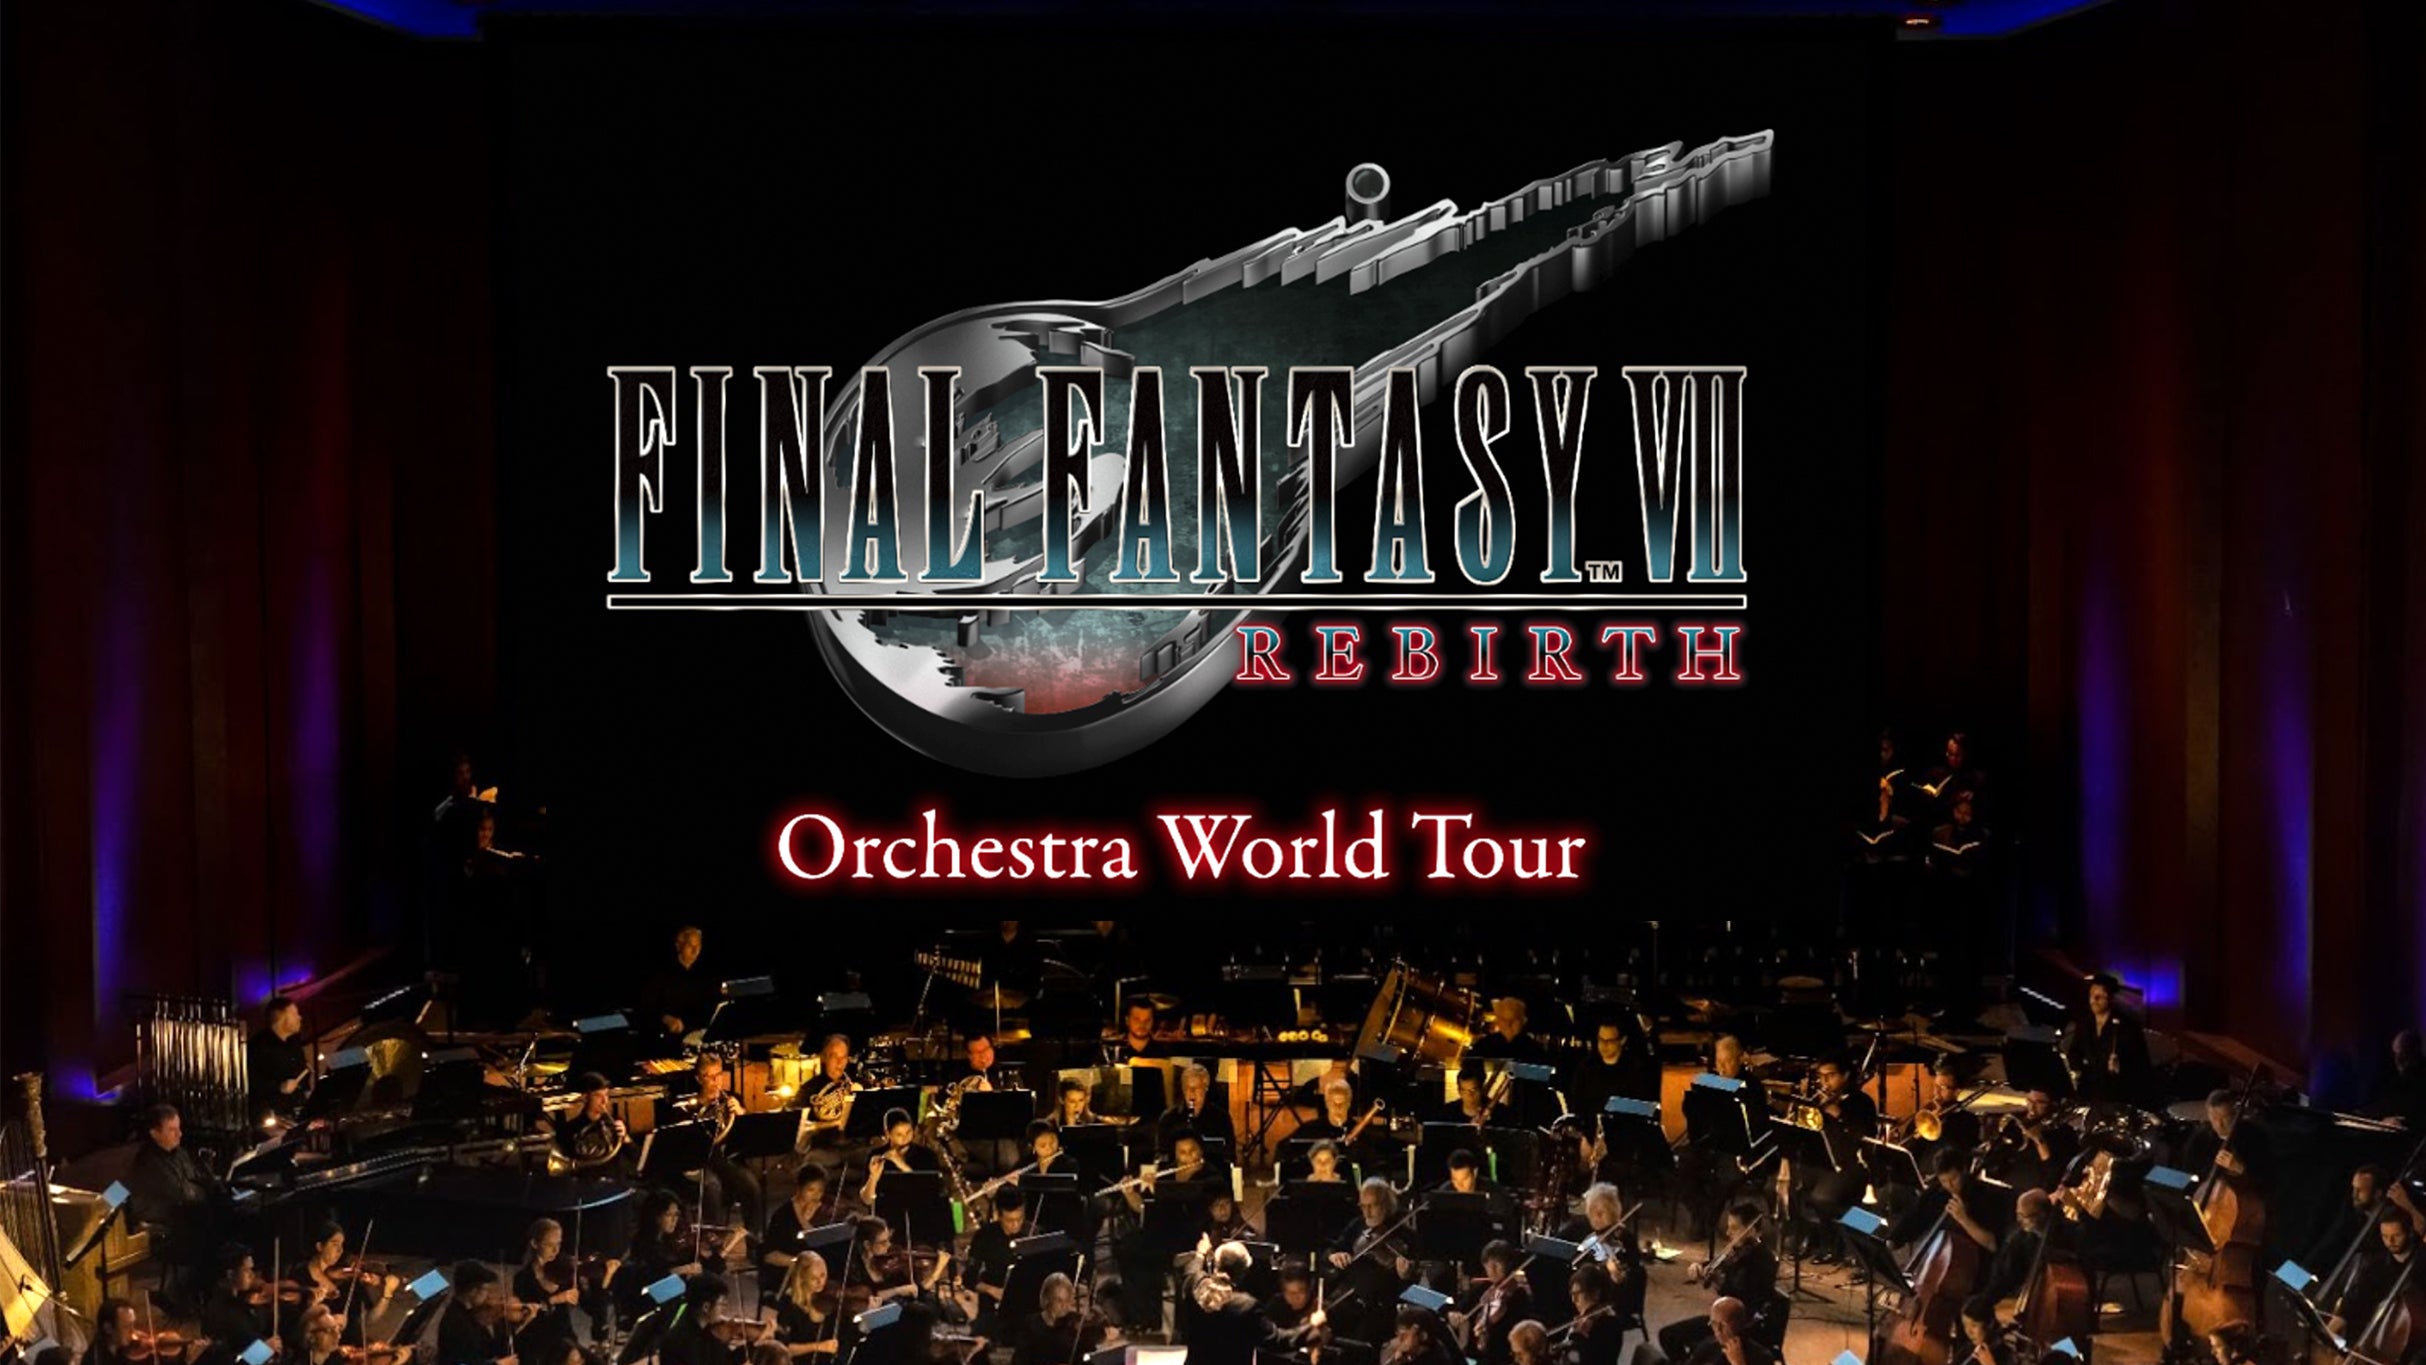 FINAL FANTASY VII REBIRTH Orchestra World Tour in Houston promo photo for Official Platinum Onsale presale offer code